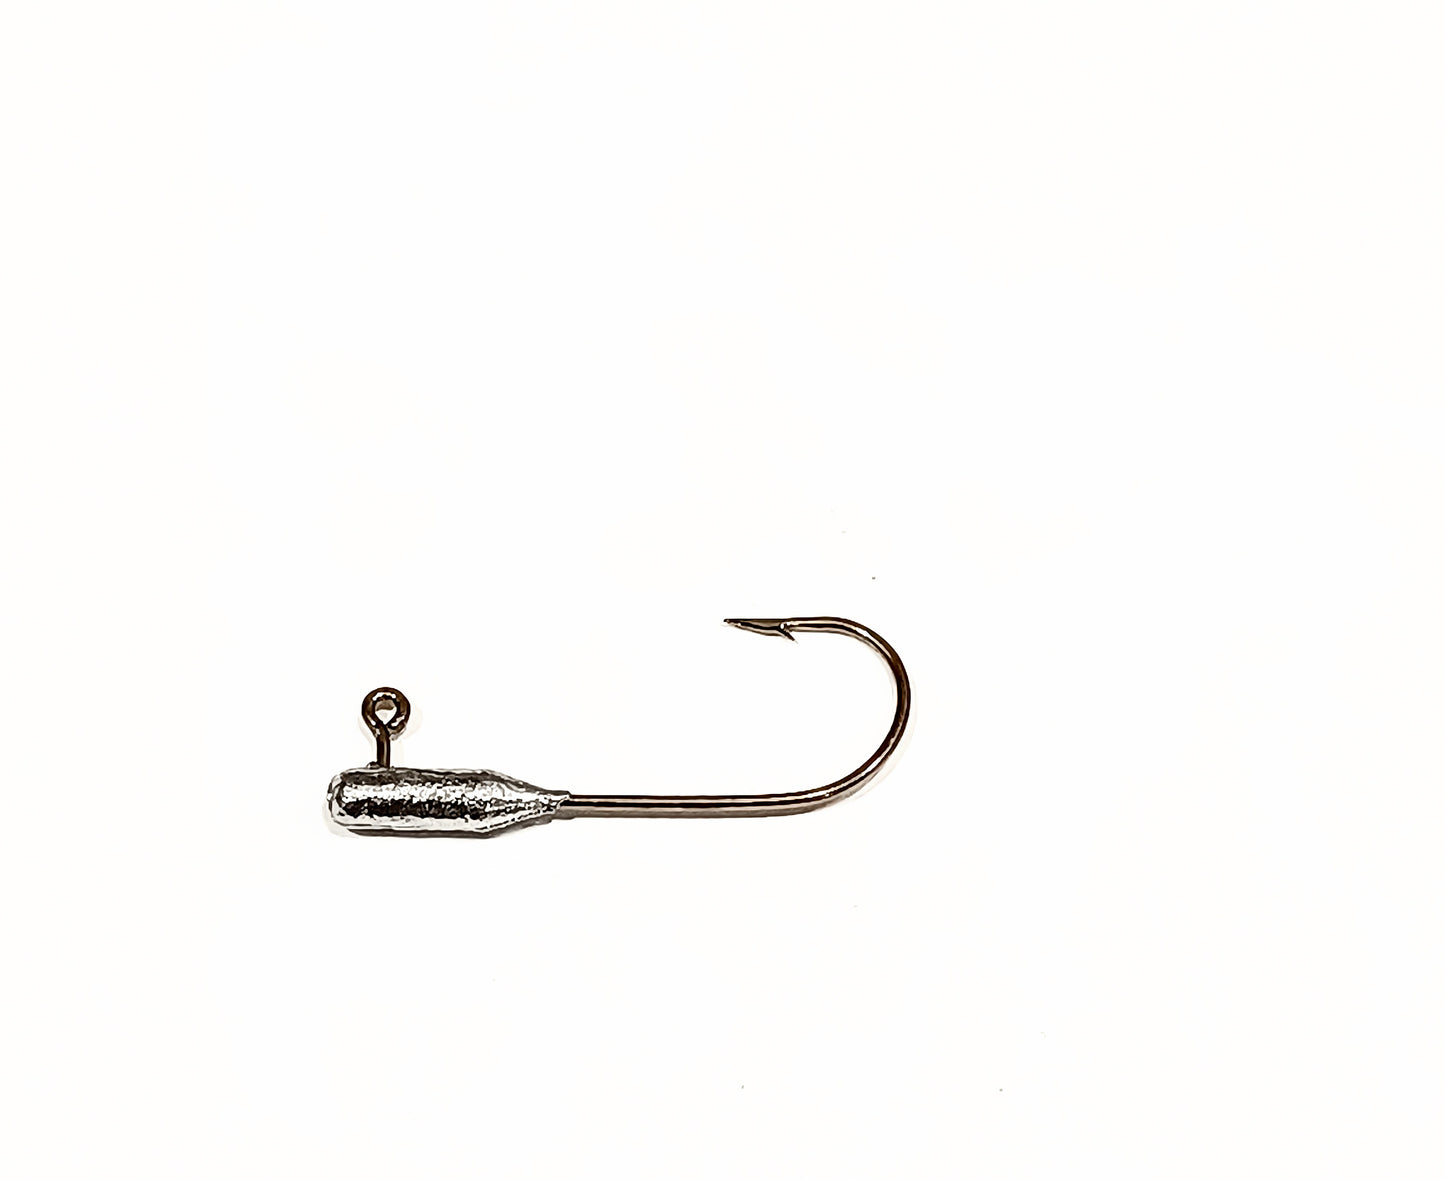 Finesse Tiny Tube Jig Heads (Long shank size: 1/32oz) our ultra light line series tackle